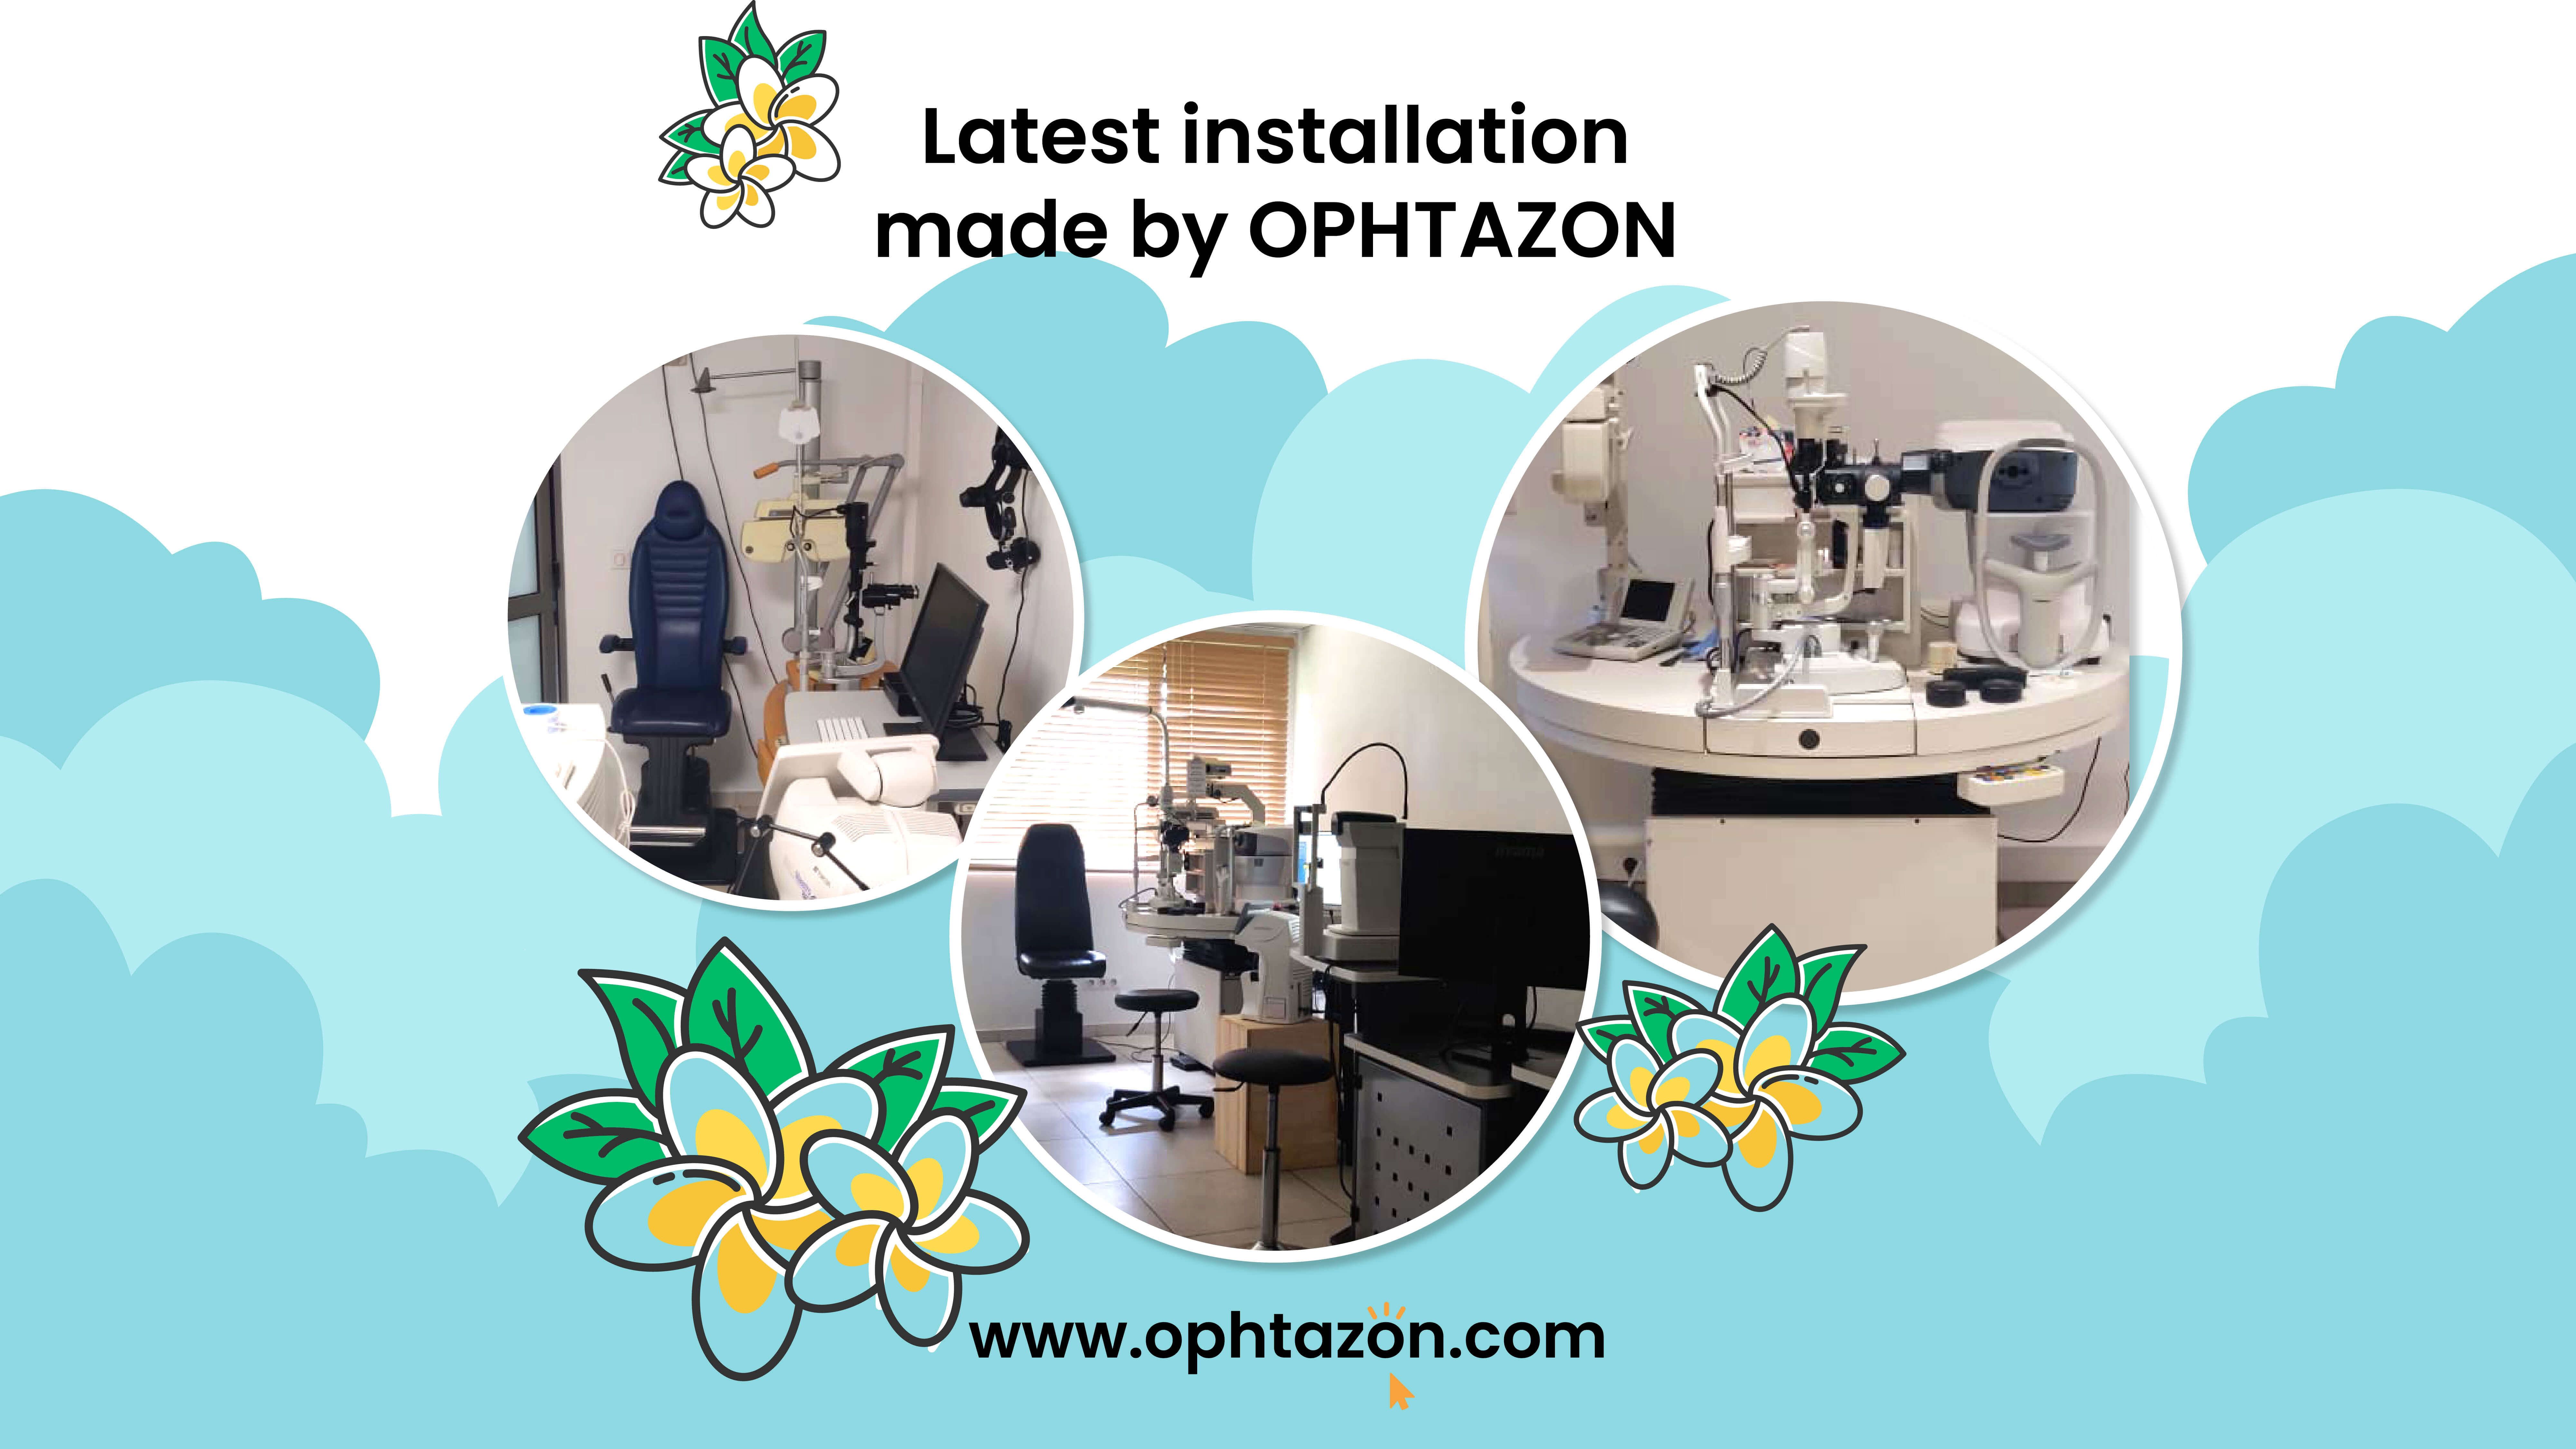 Latest installation made by OPHTAZON